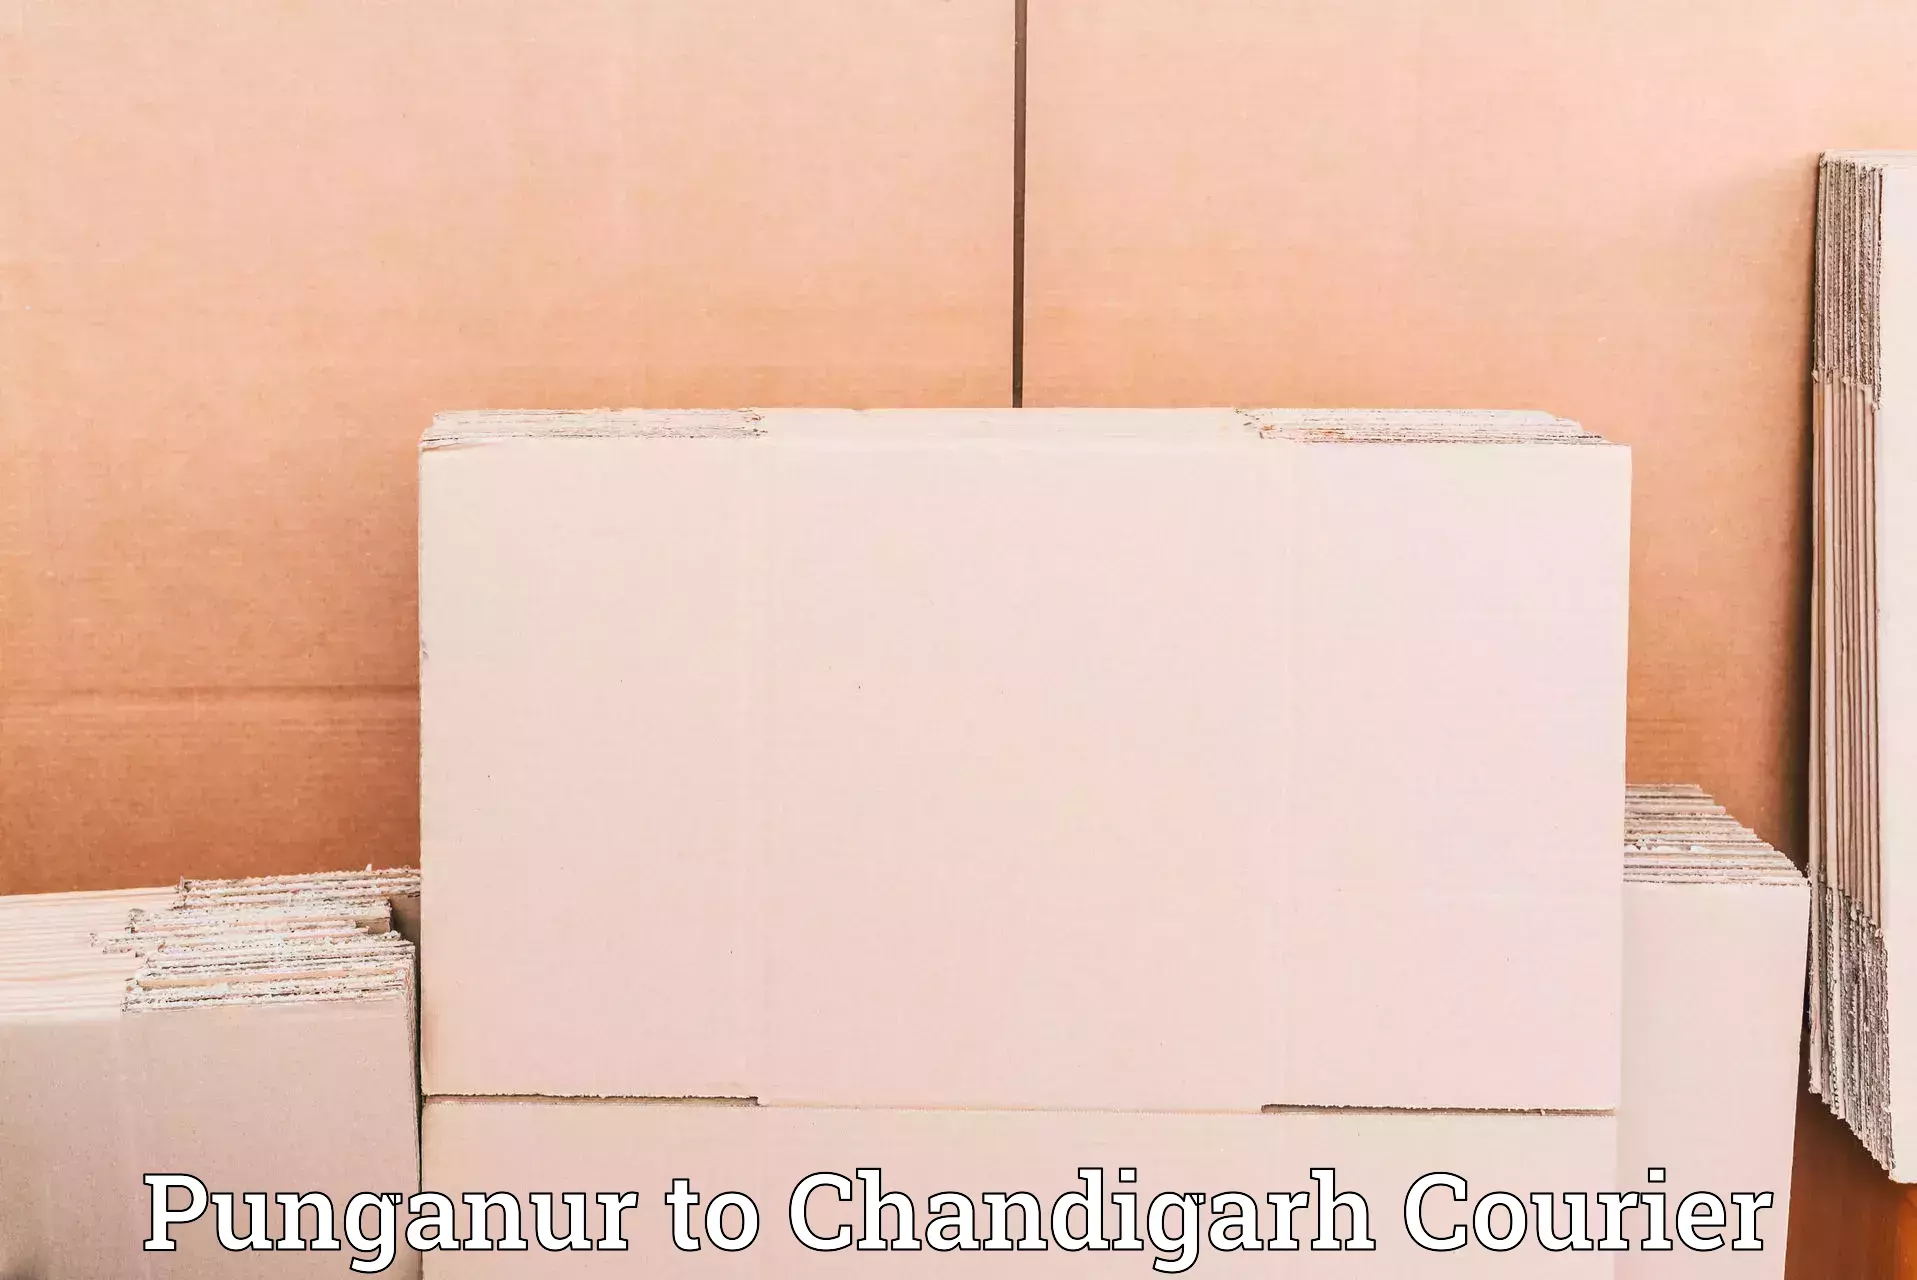 Cargo delivery service Punganur to Chandigarh